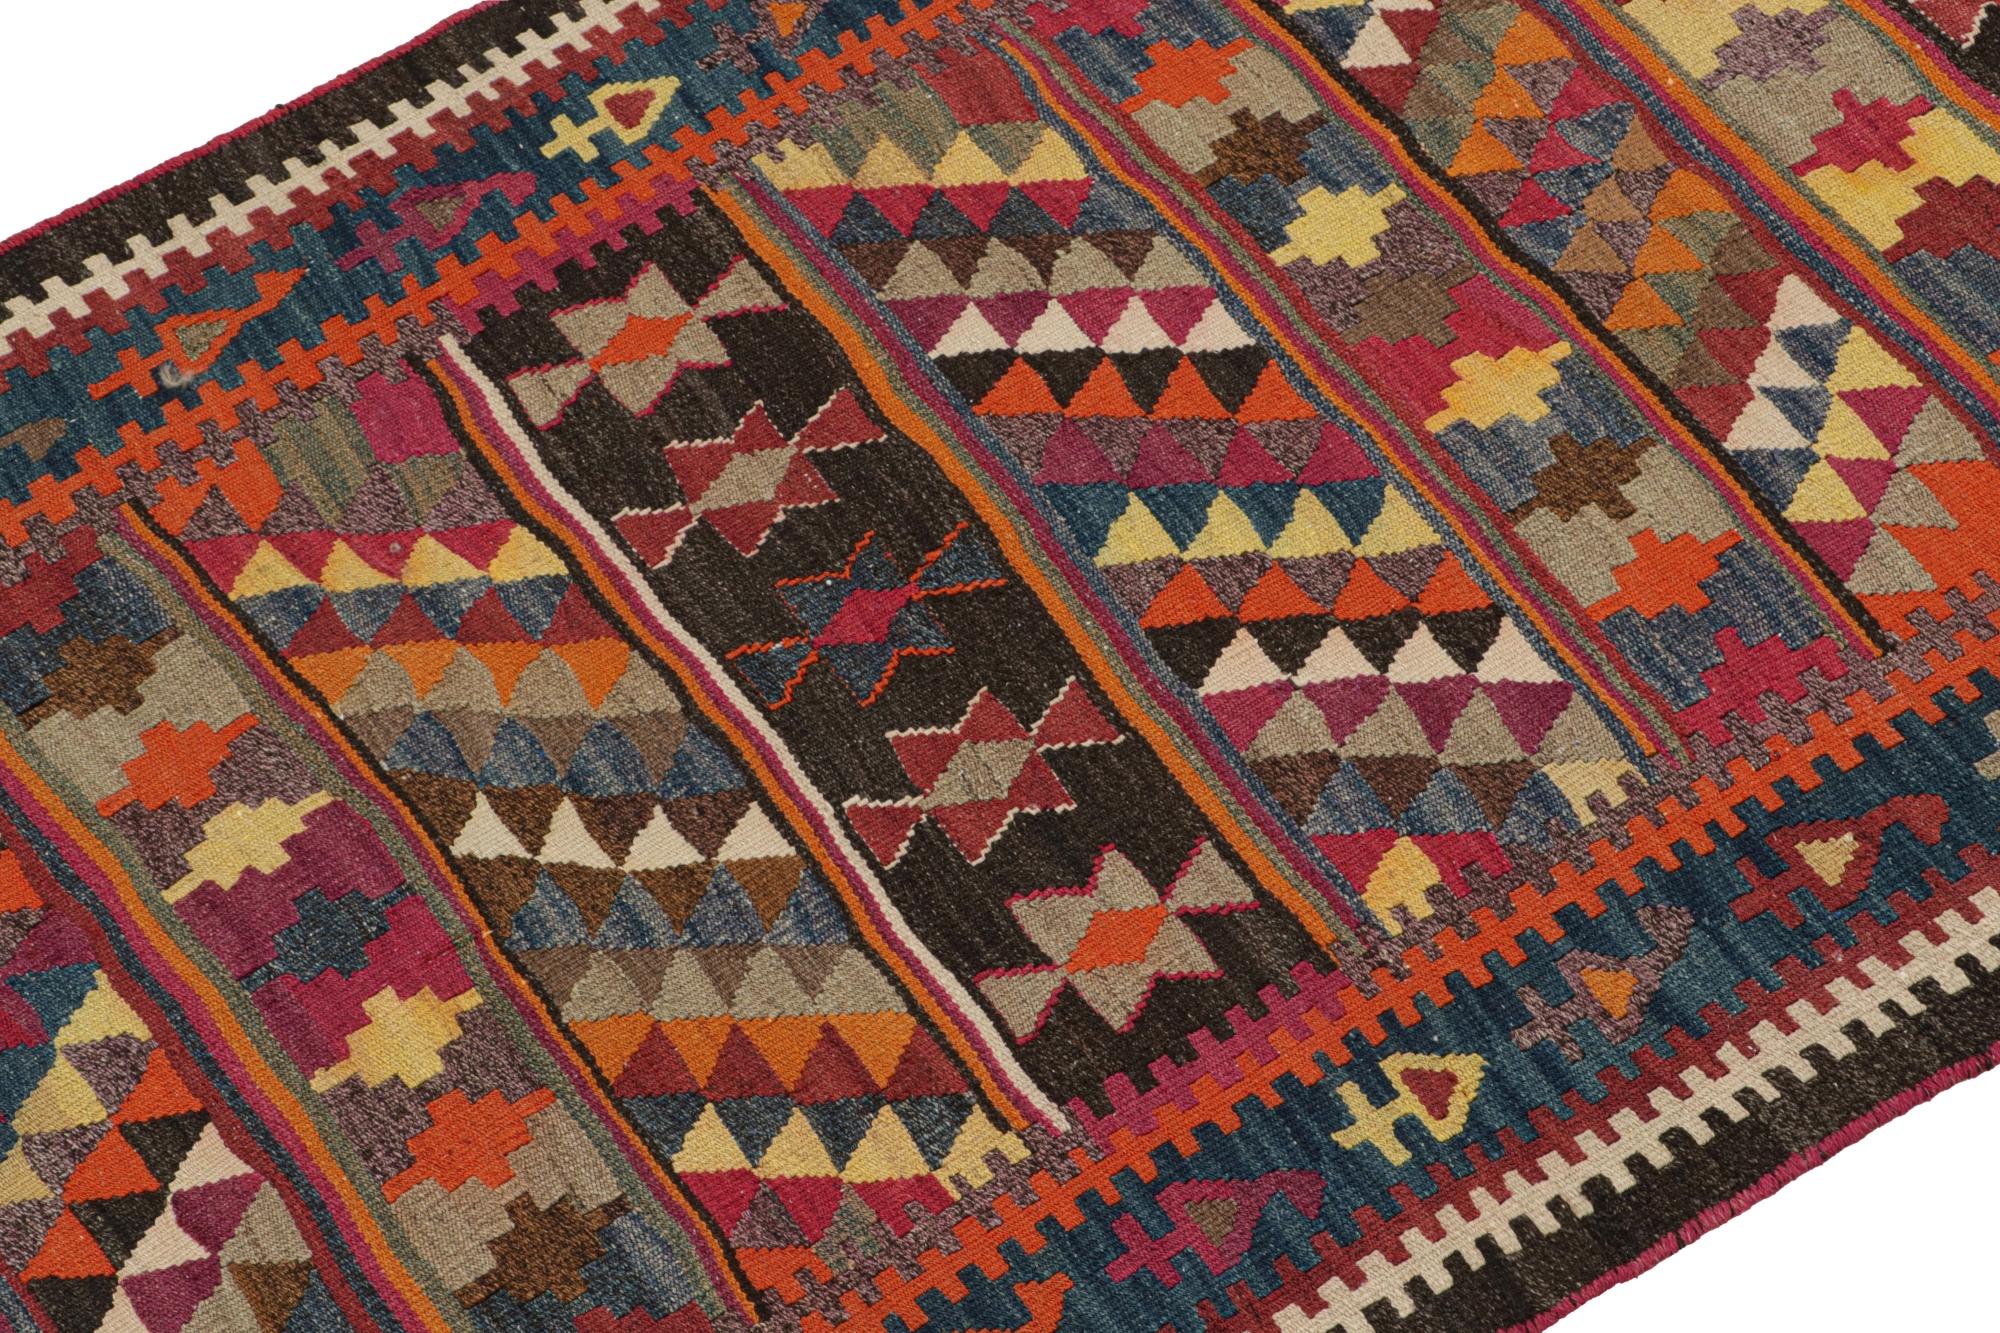 This vintage 4x8 Persian Bidjar kilim is handwoven in wool, and originates circa 1950-1960. 

Further on the Design:

The rare piece carries polychromatic geometric patterns favoring black, orange, pink & yellow. Connoisseurs may admire this